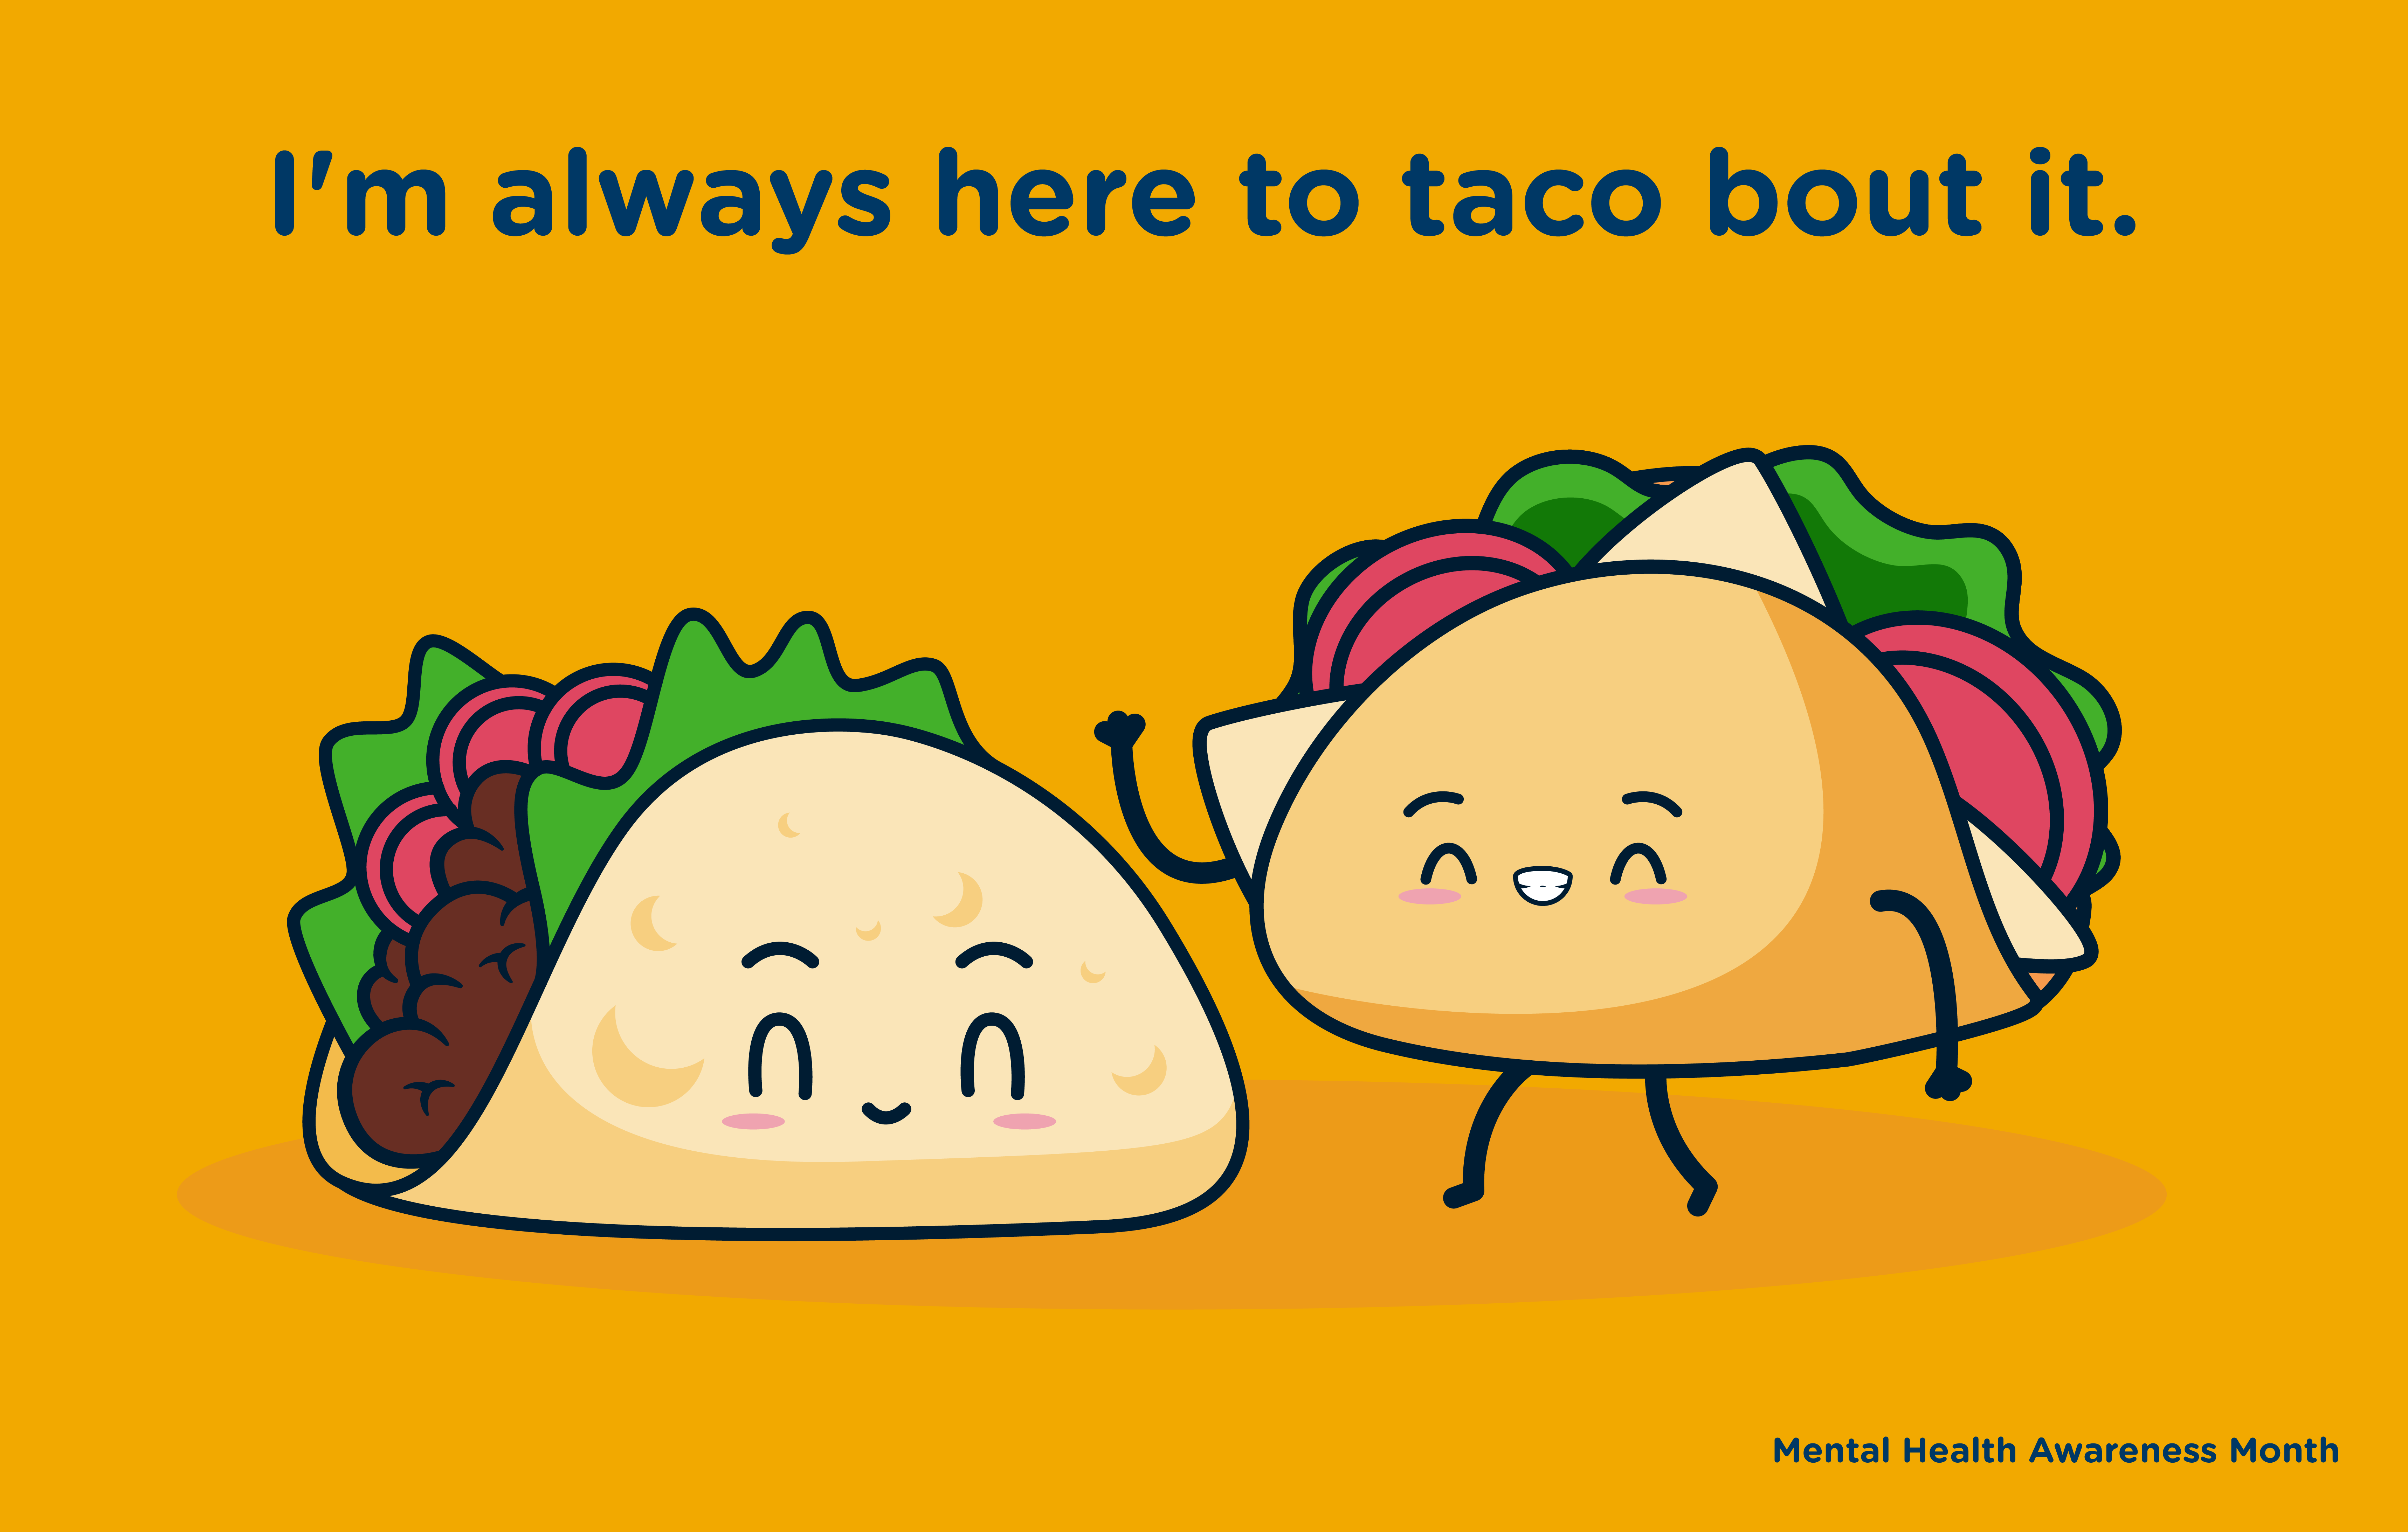 Mental Health Awareness Month: I'm always here to taco bout it.